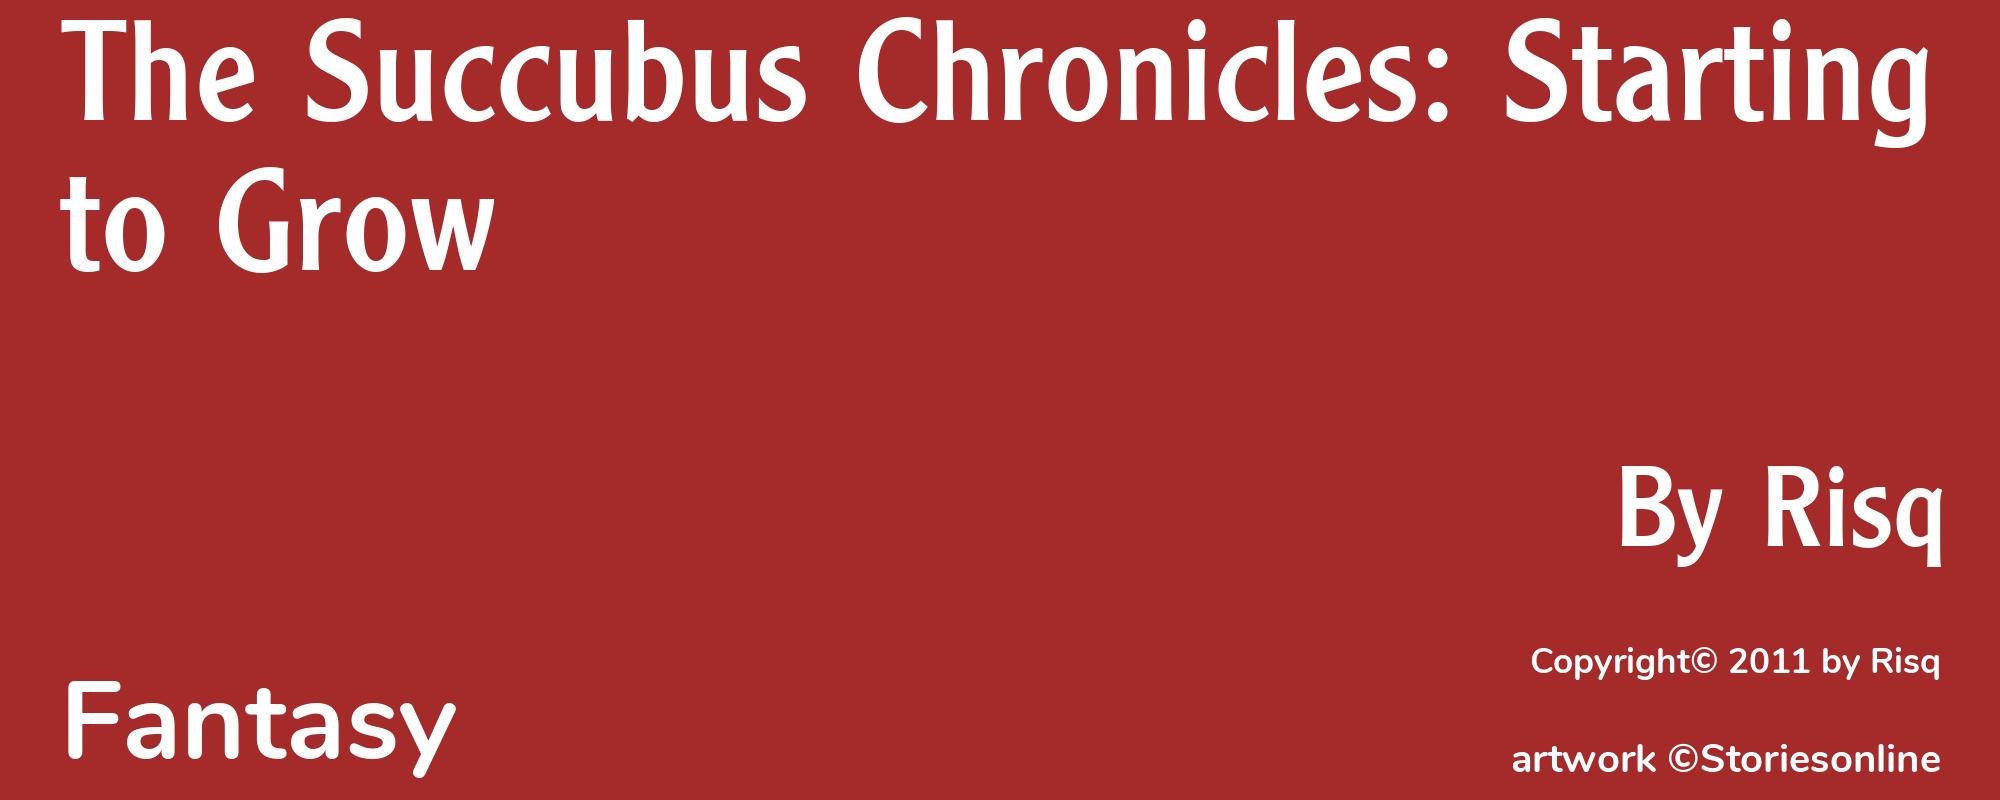 The Succubus Chronicles: Starting to Grow - Cover